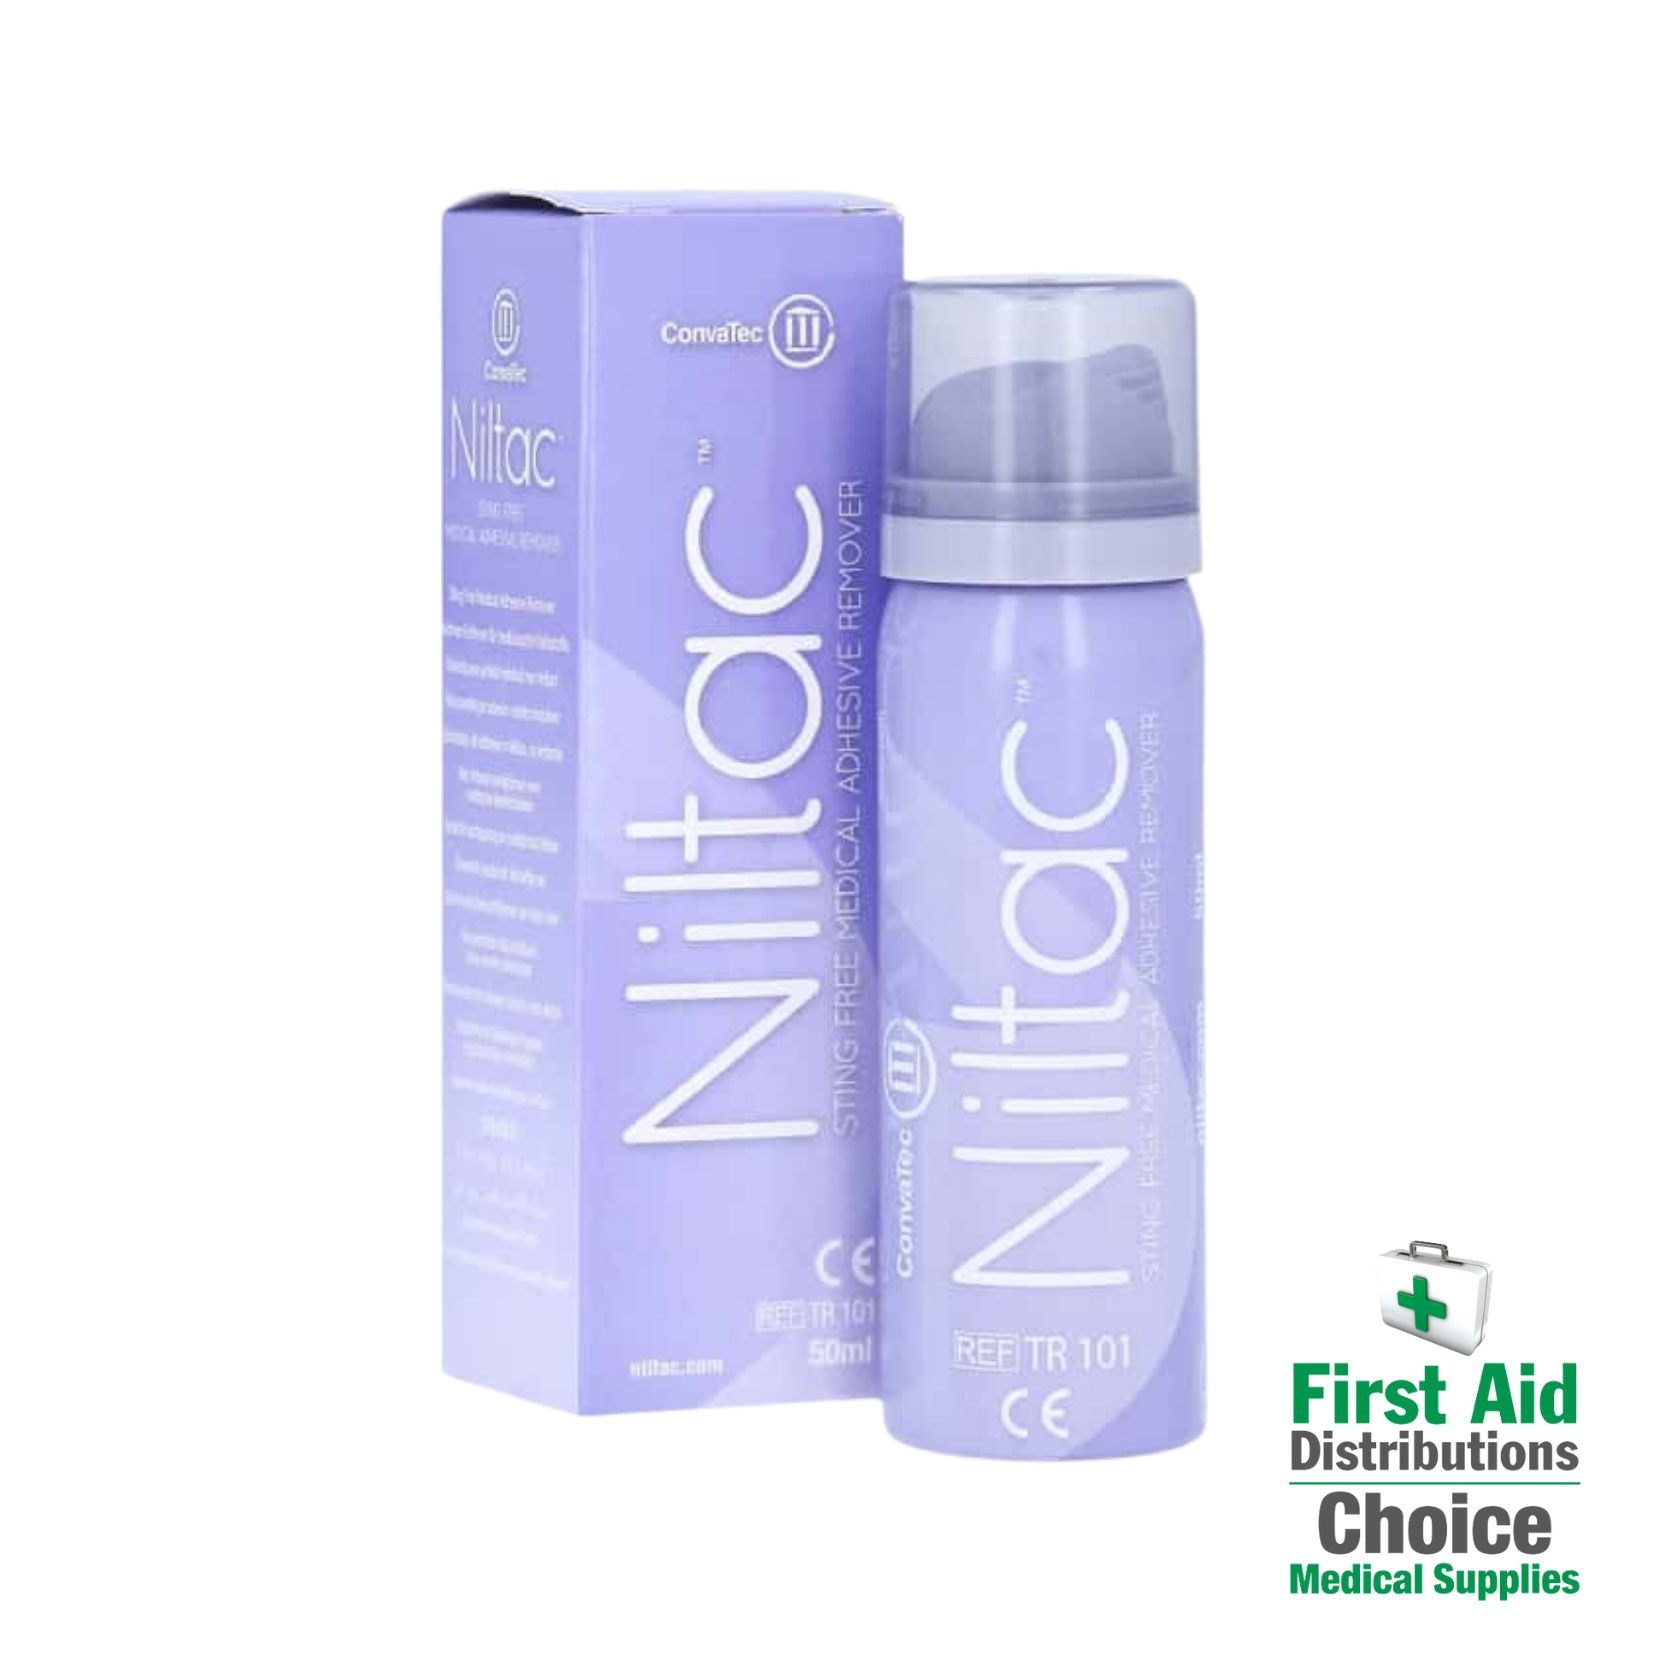 collections/Niltac_Adhesive_Remover_Spray_First_Aid_Distributions_2.png